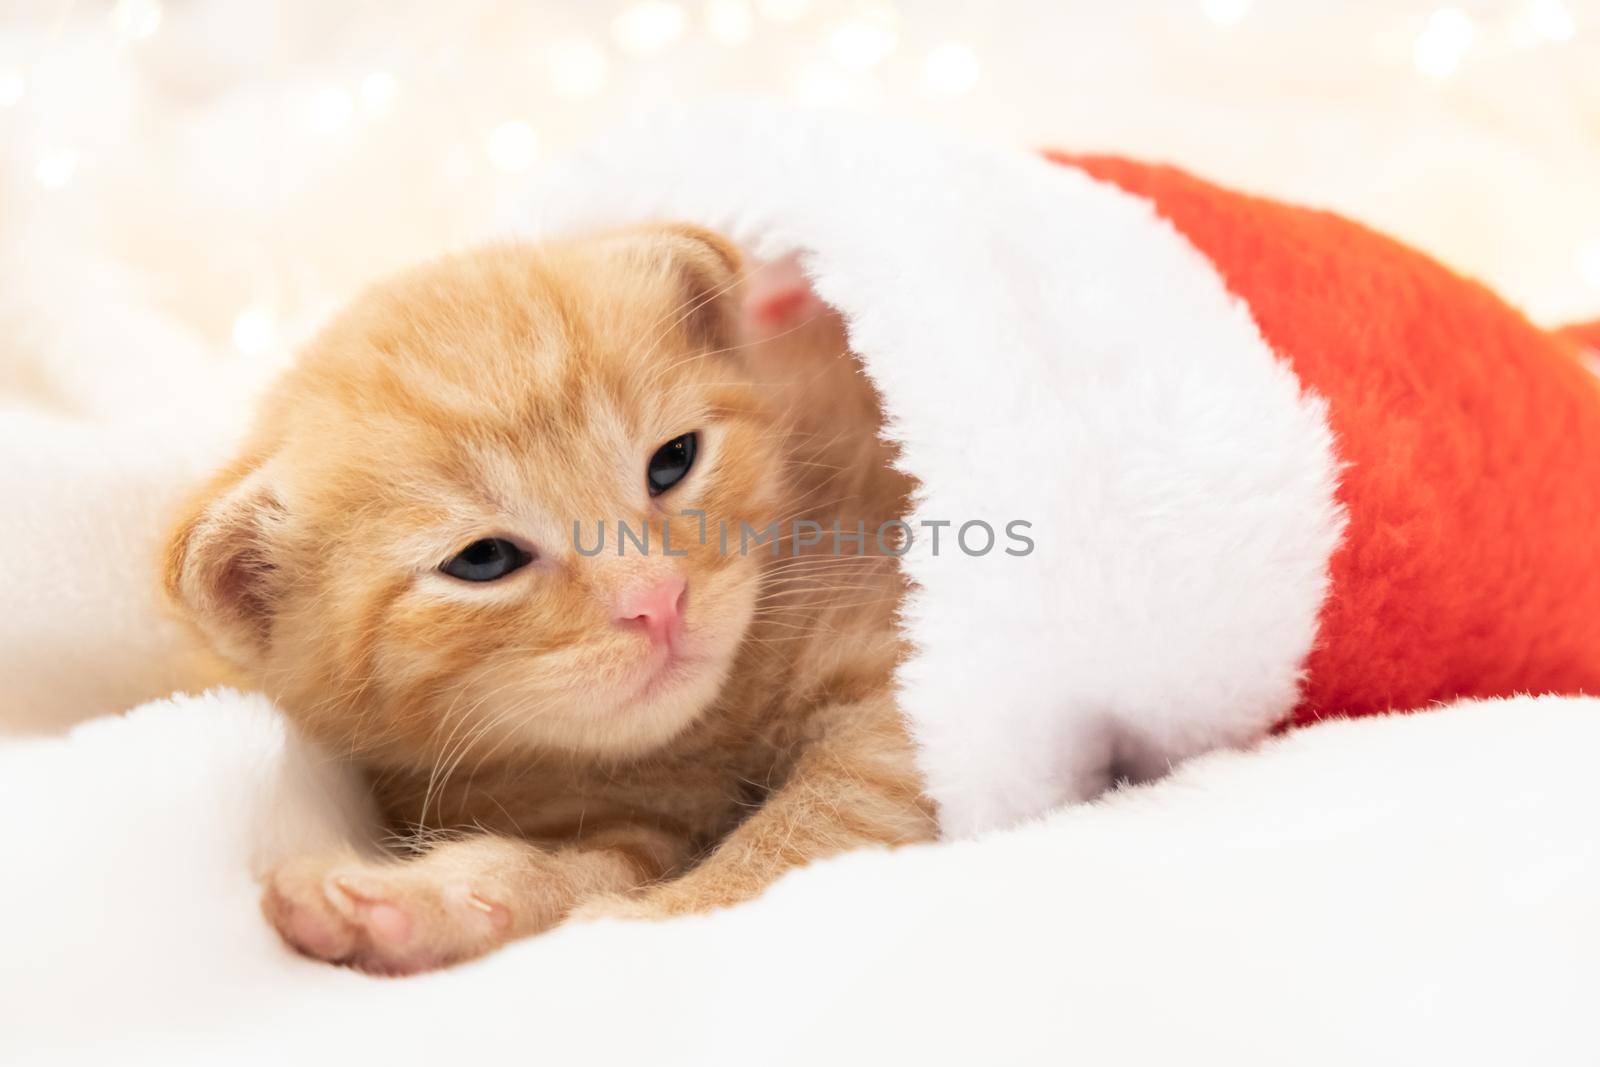 Little Christmas orange kitten lies sweet and cozy in a santa hat. Soft and cozy against the background of the New Year's garland. Christmas, home comfort and new year holidays concept by chelmicky